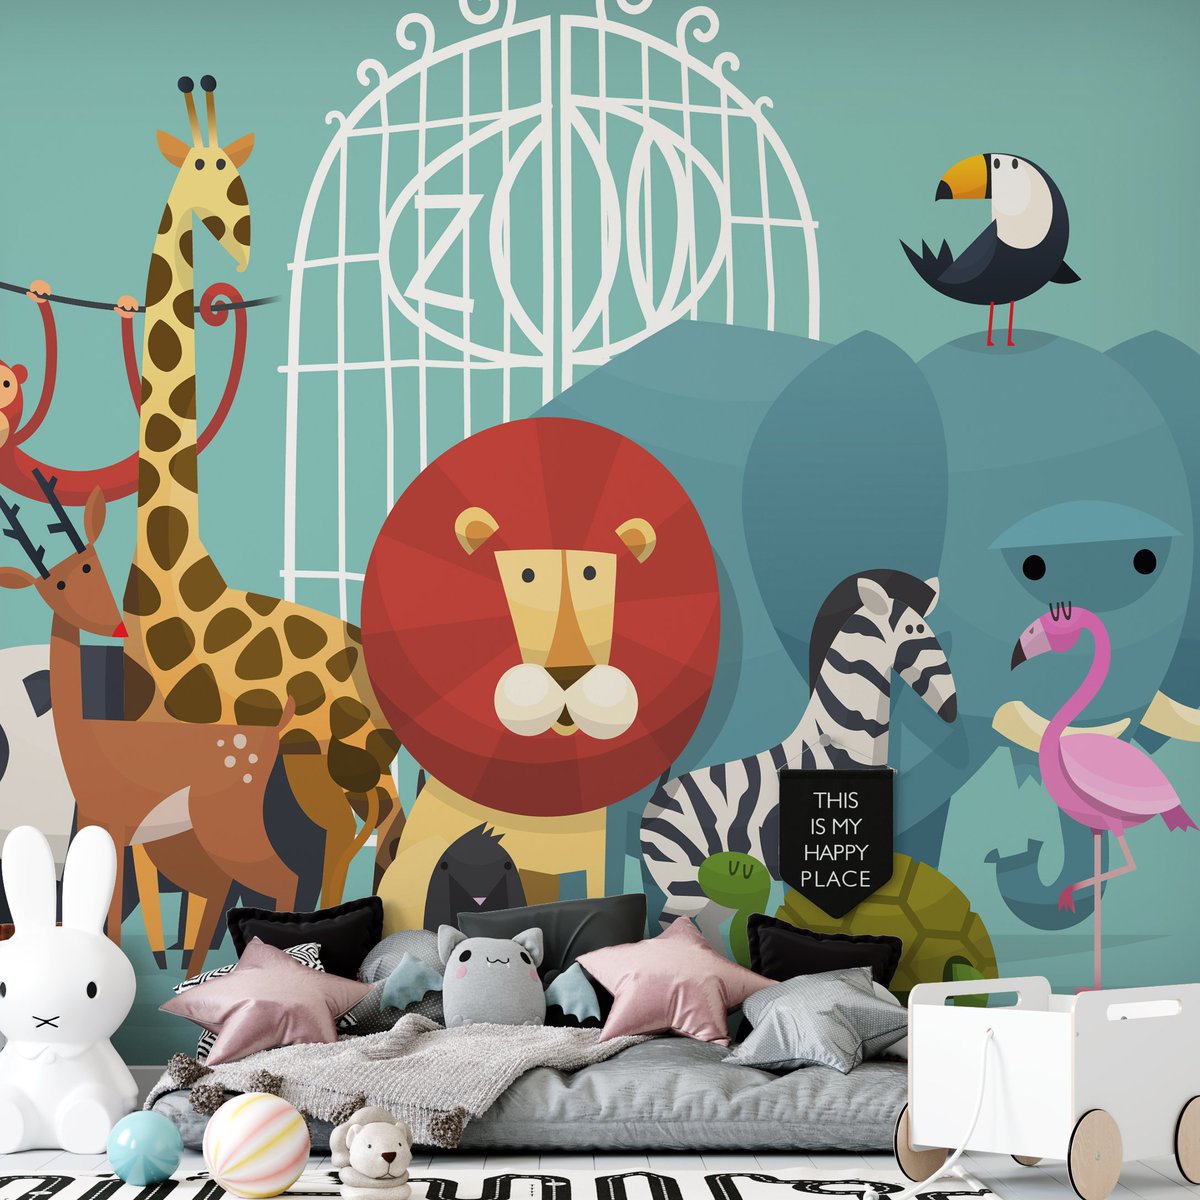 Bring the zoo home with our Zoo Animals Wallpaper Mural! 🐘 Perfect for nurseries and playrooms. 
#kidswallpaper #kidsroomwallpaper #wallpaperforkids #childrenwallpaper #KidsDecor #AnimalWallpaper #NurseryIdeas #ZooTheme #PlayfulSpace #HomeDecor #Mural

bit.ly/49XCkTU